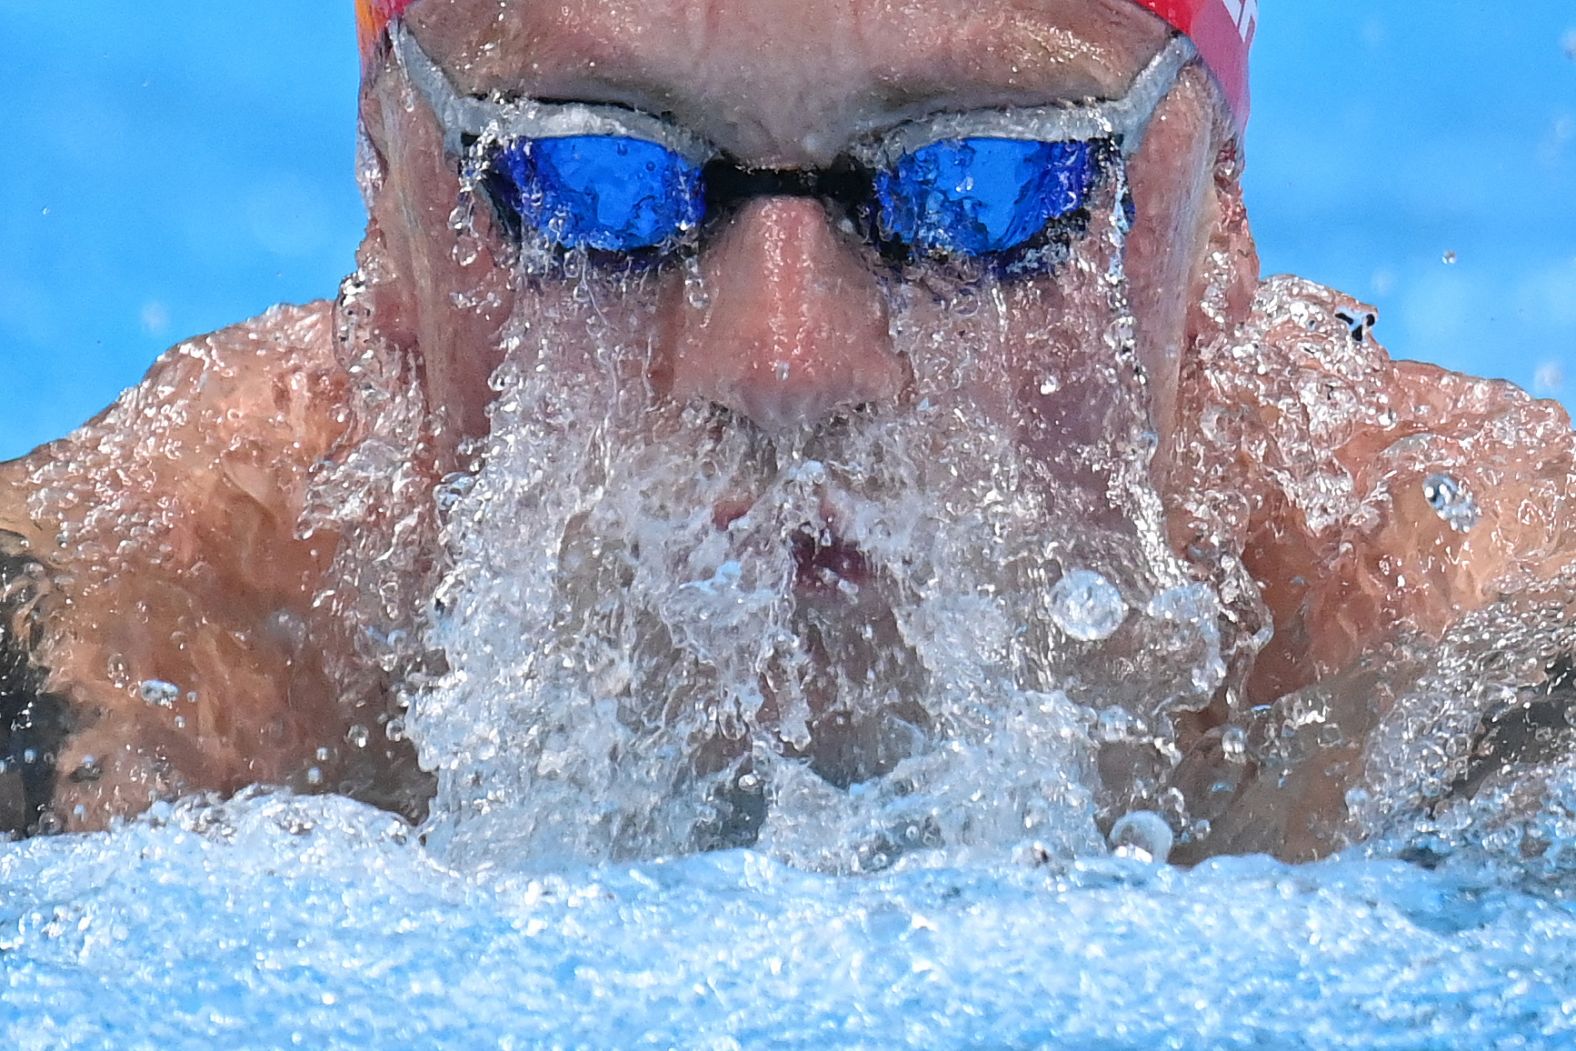 Great Britain's Adam Peaty competes in a semifinal of the 100-meter breaststroke on July 25. Peaty, the world-record holder in the event, <a href="index.php?page=&url=https%3A%2F%2Fwww.cnn.com%2Fworld%2Flive-news%2Ftokyo-2020-olympics-07-25-21-spt%2Fh_b65390879a4243d82bb18001152511c3" target="_blank">went on to win gold in the final.</a> He also won the event at the 2016 Olympics.